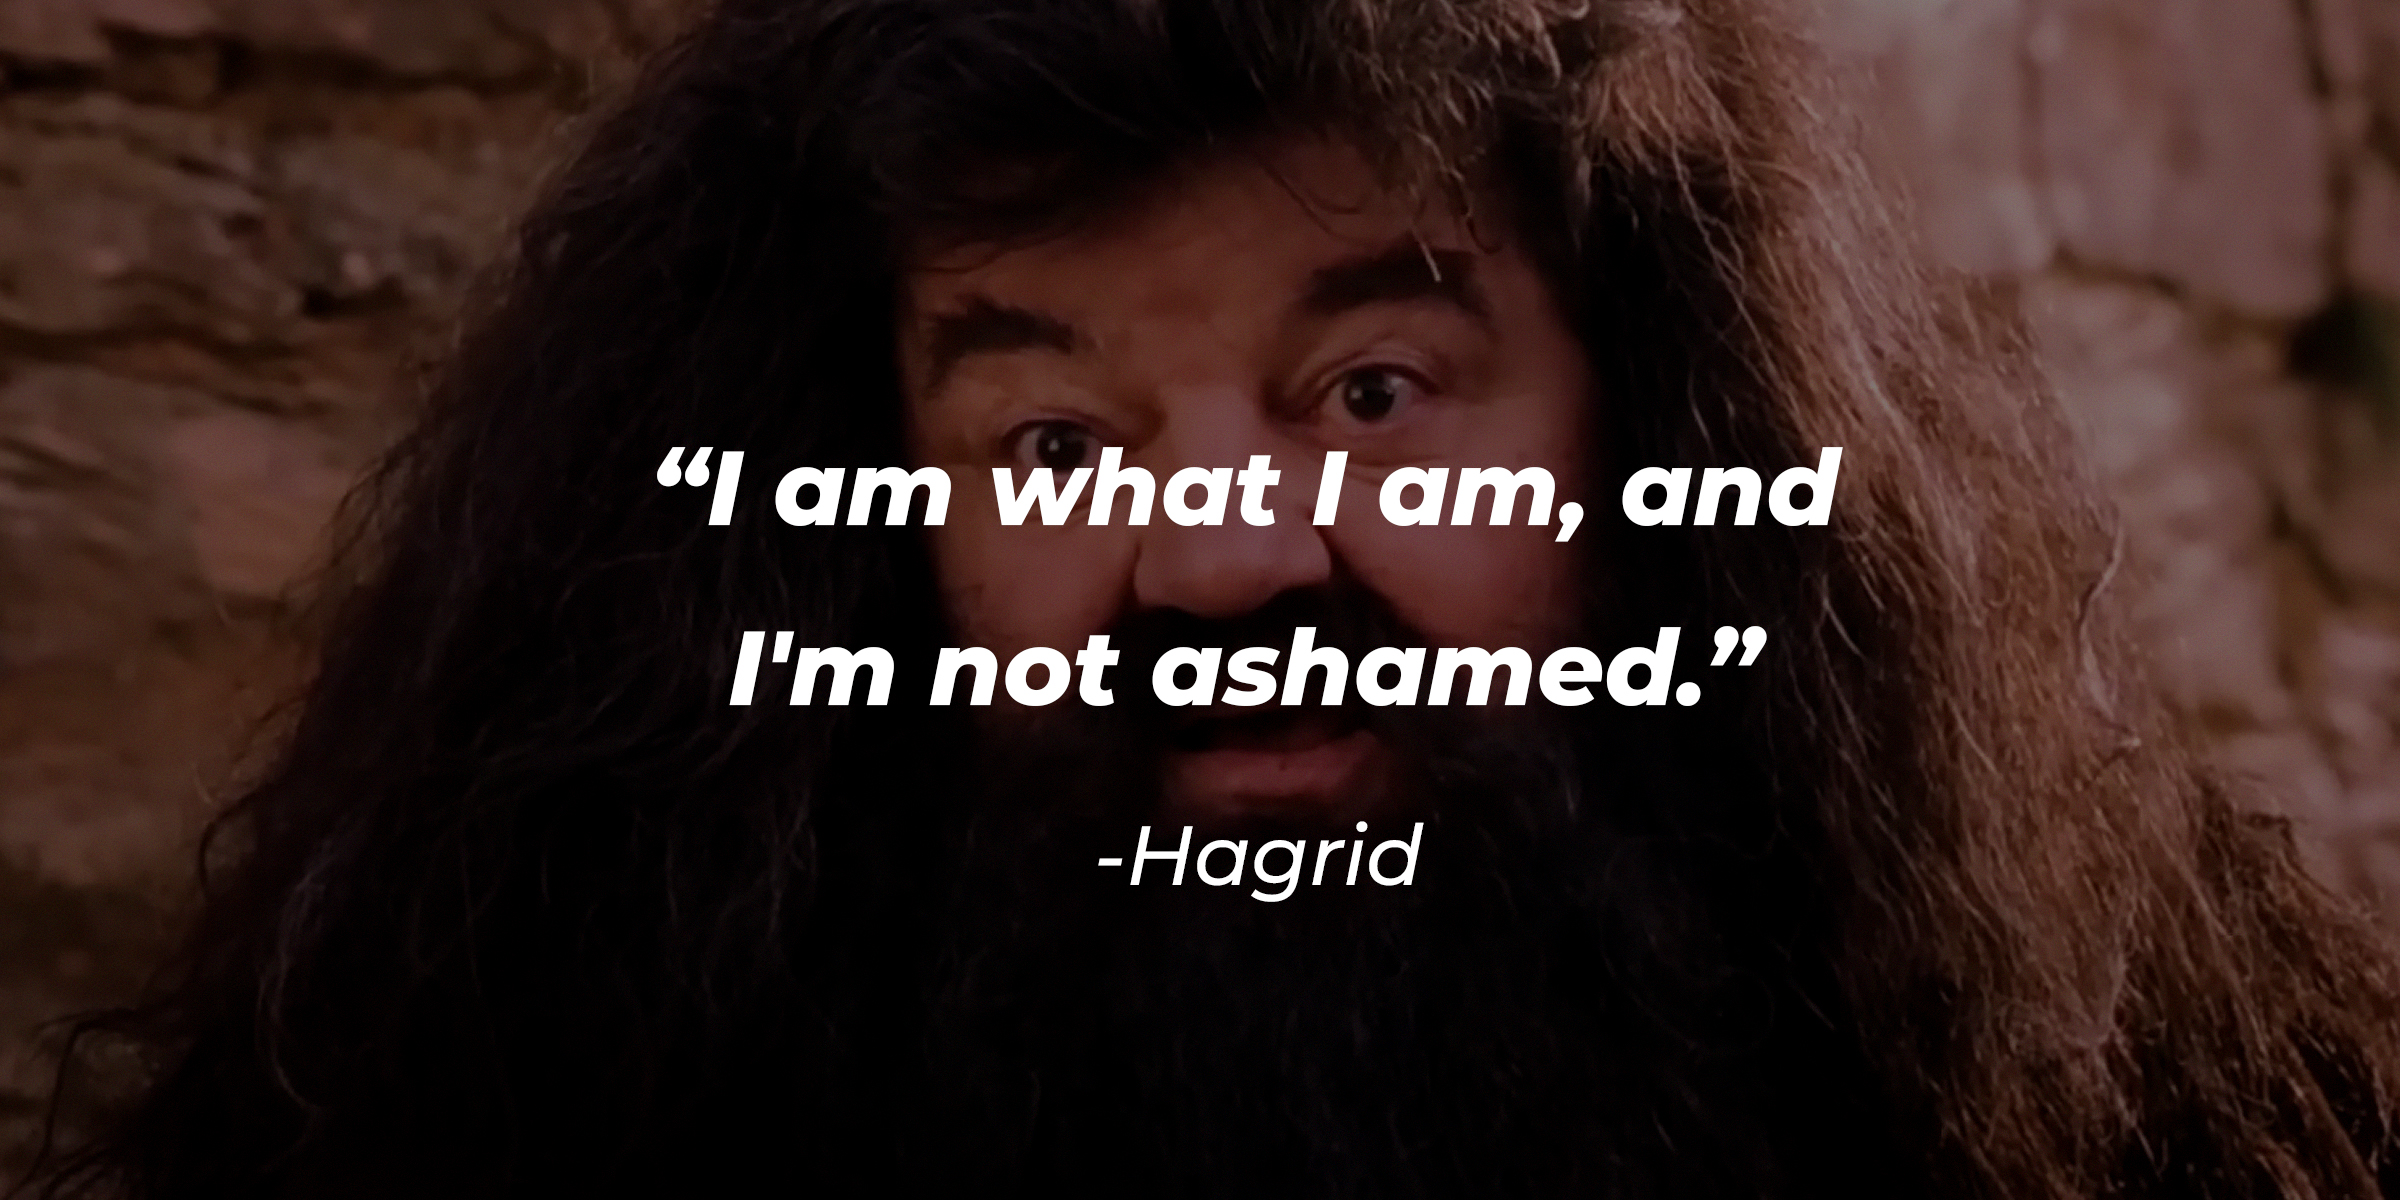 A photo of Hagrid with the quote, "I am what I am, and I'm not ashamed." | Source: facebook.com/harrypotter